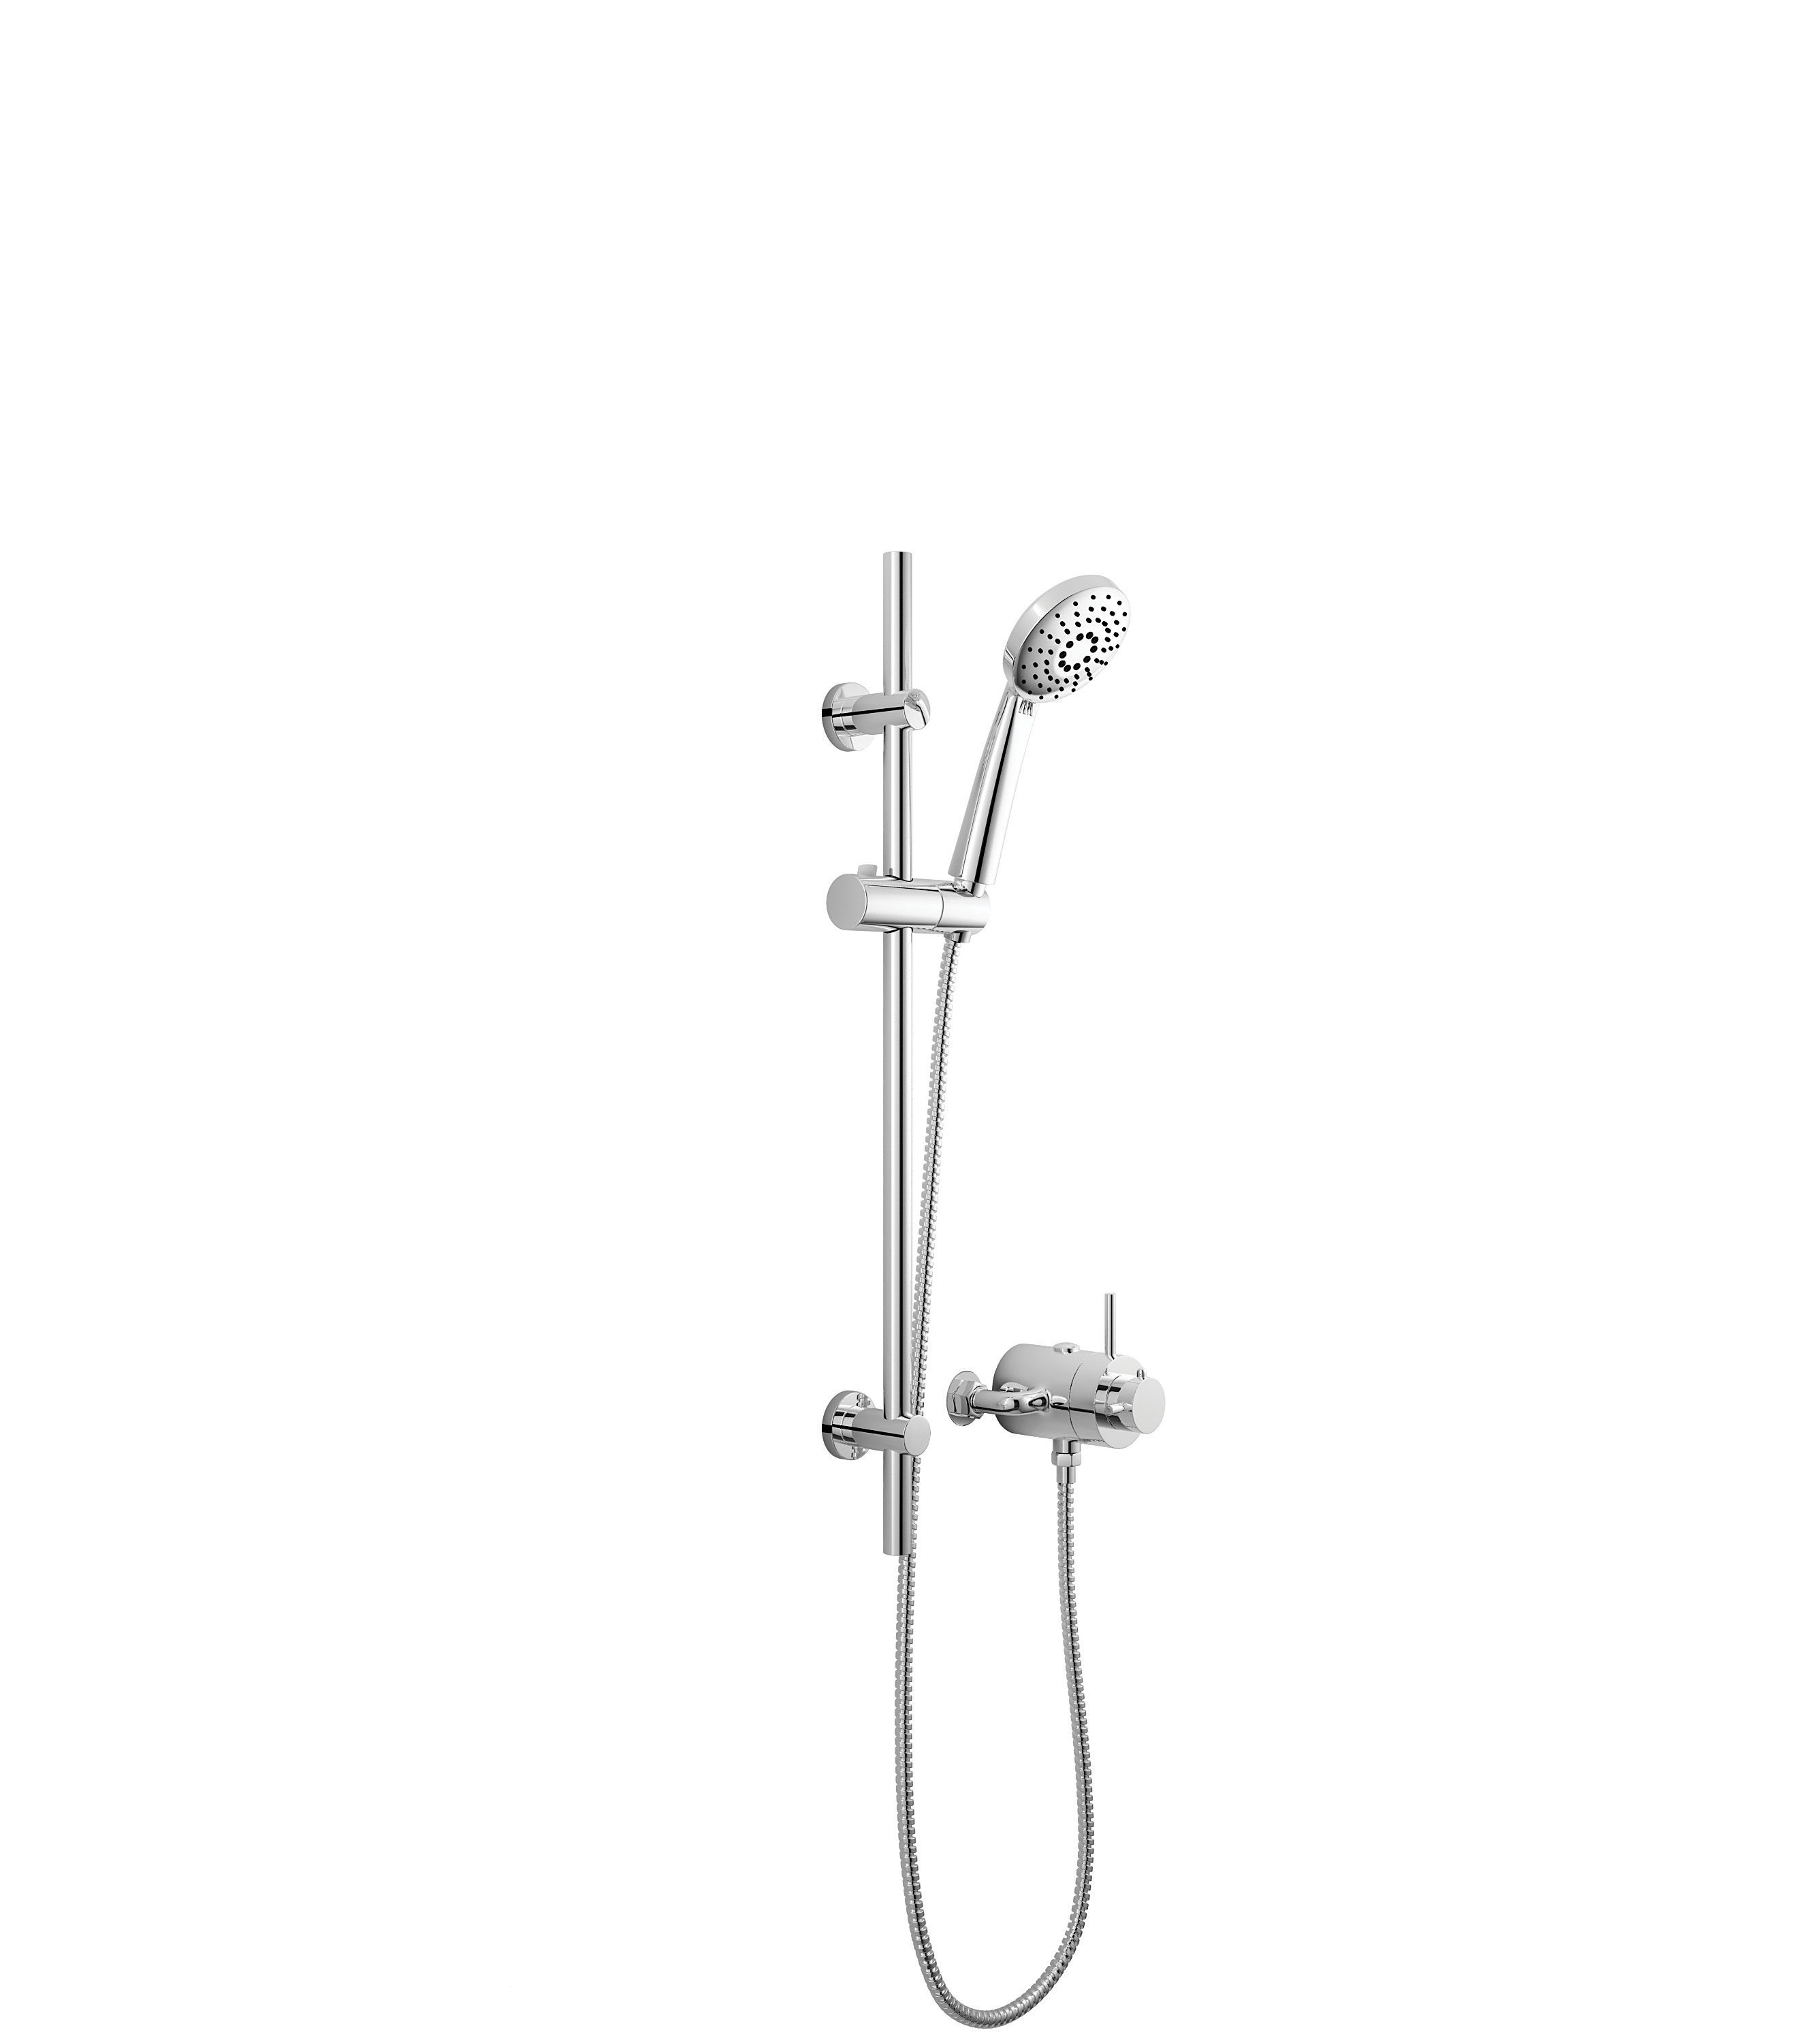 Wickes Style Thermostatic Mixer Shower - Chrome